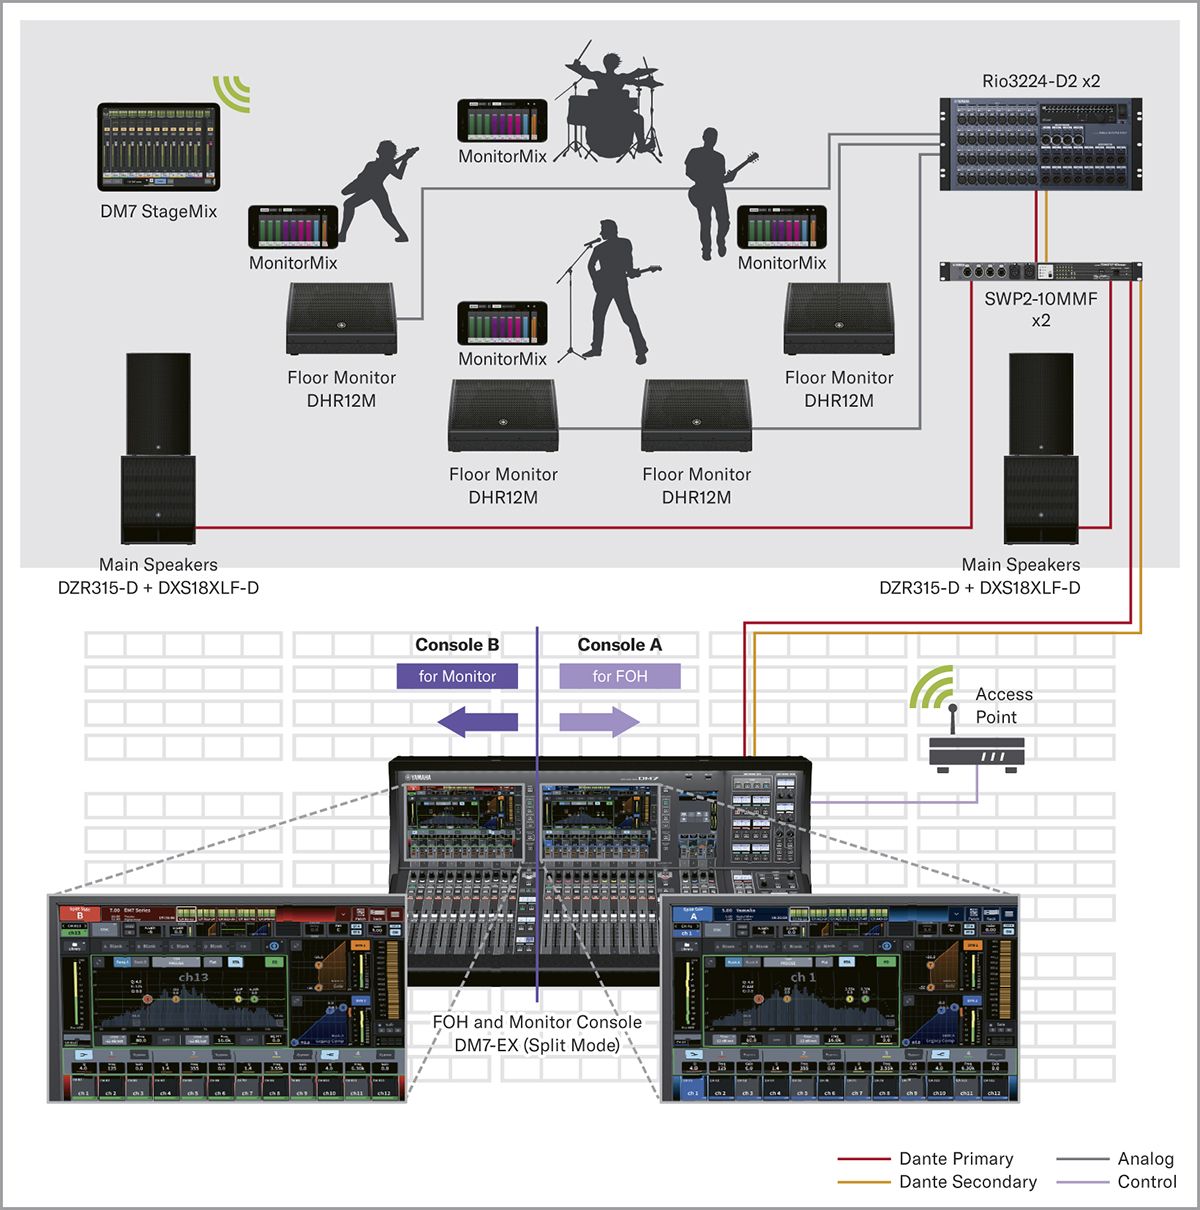 DM7 Series - Systems - Mixers - Professional Audio - Products 